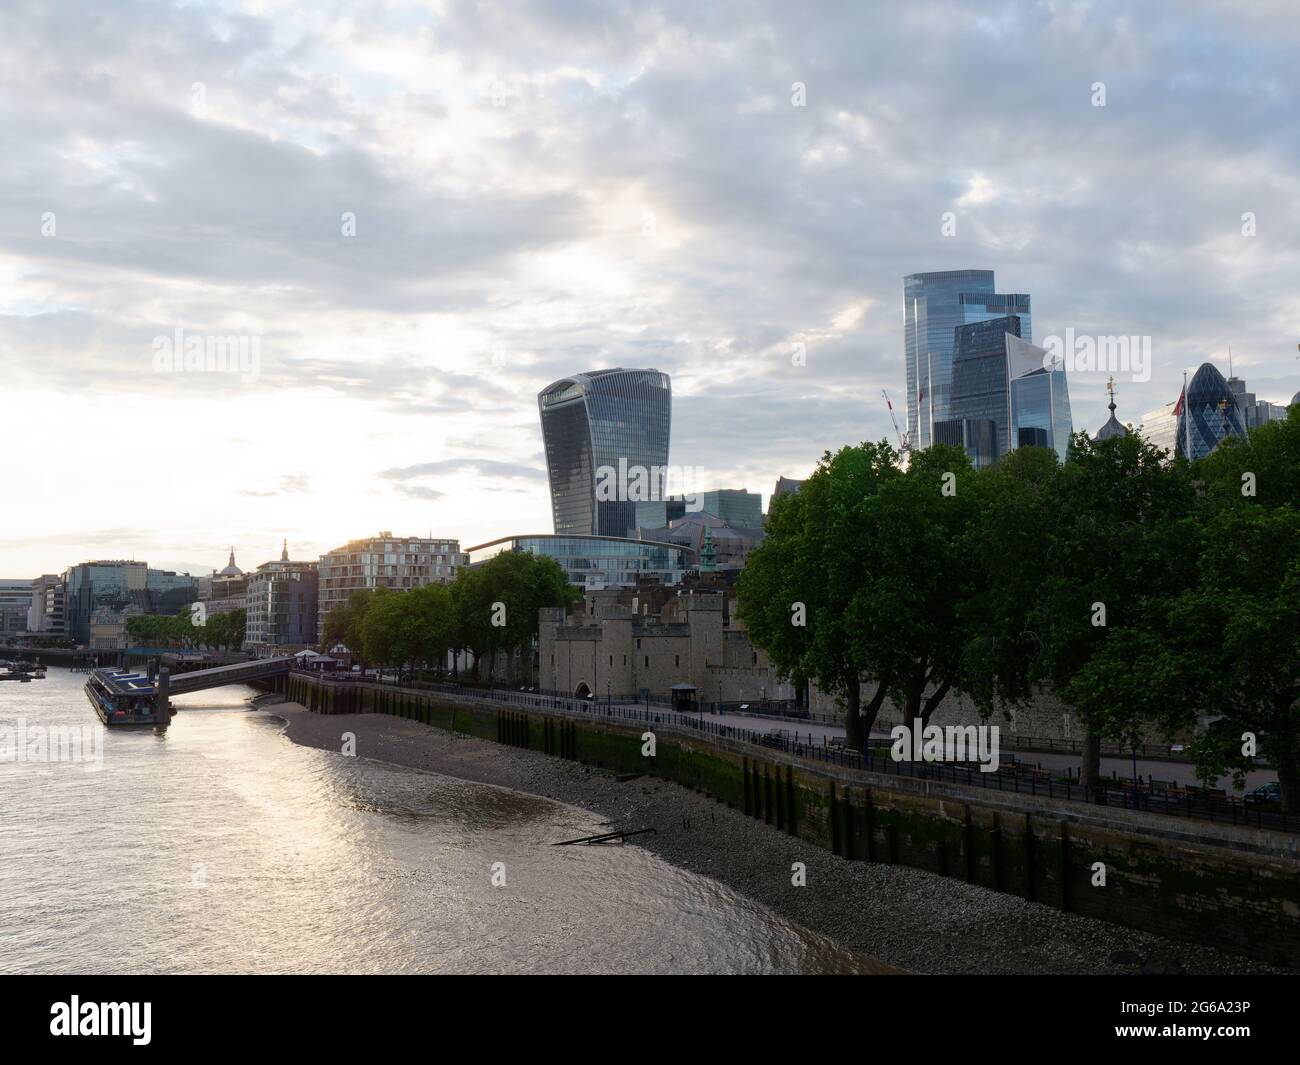 London, Greater London, England - June 26 2021: River Thames on a summers evening with the Walkie Talkie skyscraper housing the Sky Garden. Stock Photo